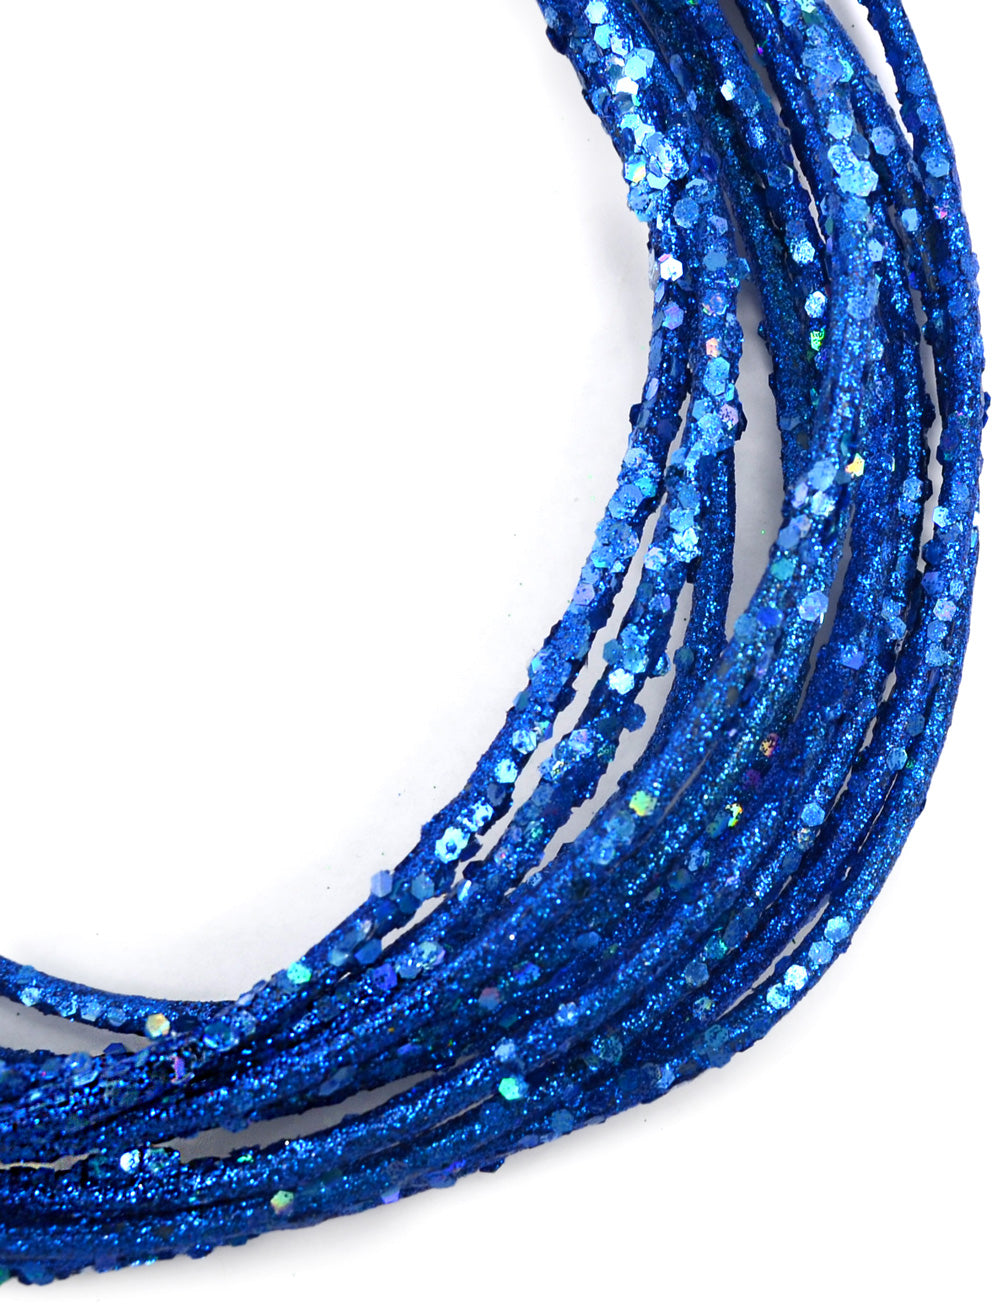 Wired Glamour Rope: Royal Blue (25 Feet)